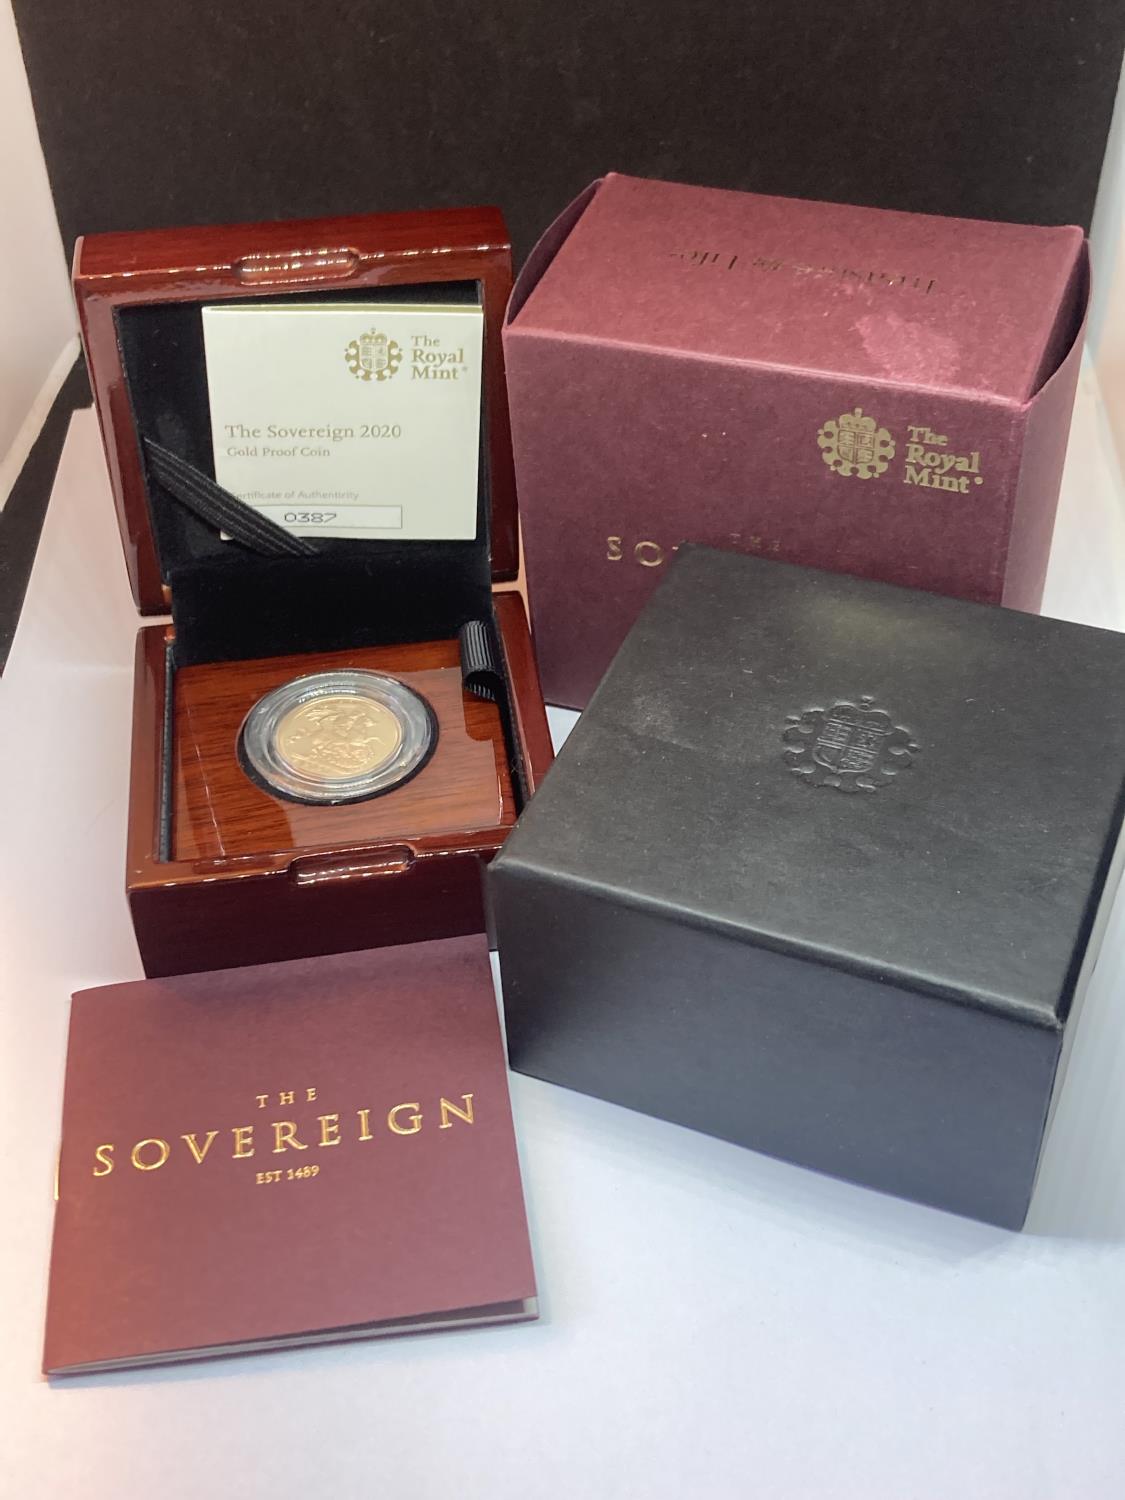 A 2020 THE SOVEREIGN GOLD PROOF LIMITED EDITION NUMBER 387 OF 7,995 IN A WOODEN BOXED CASE